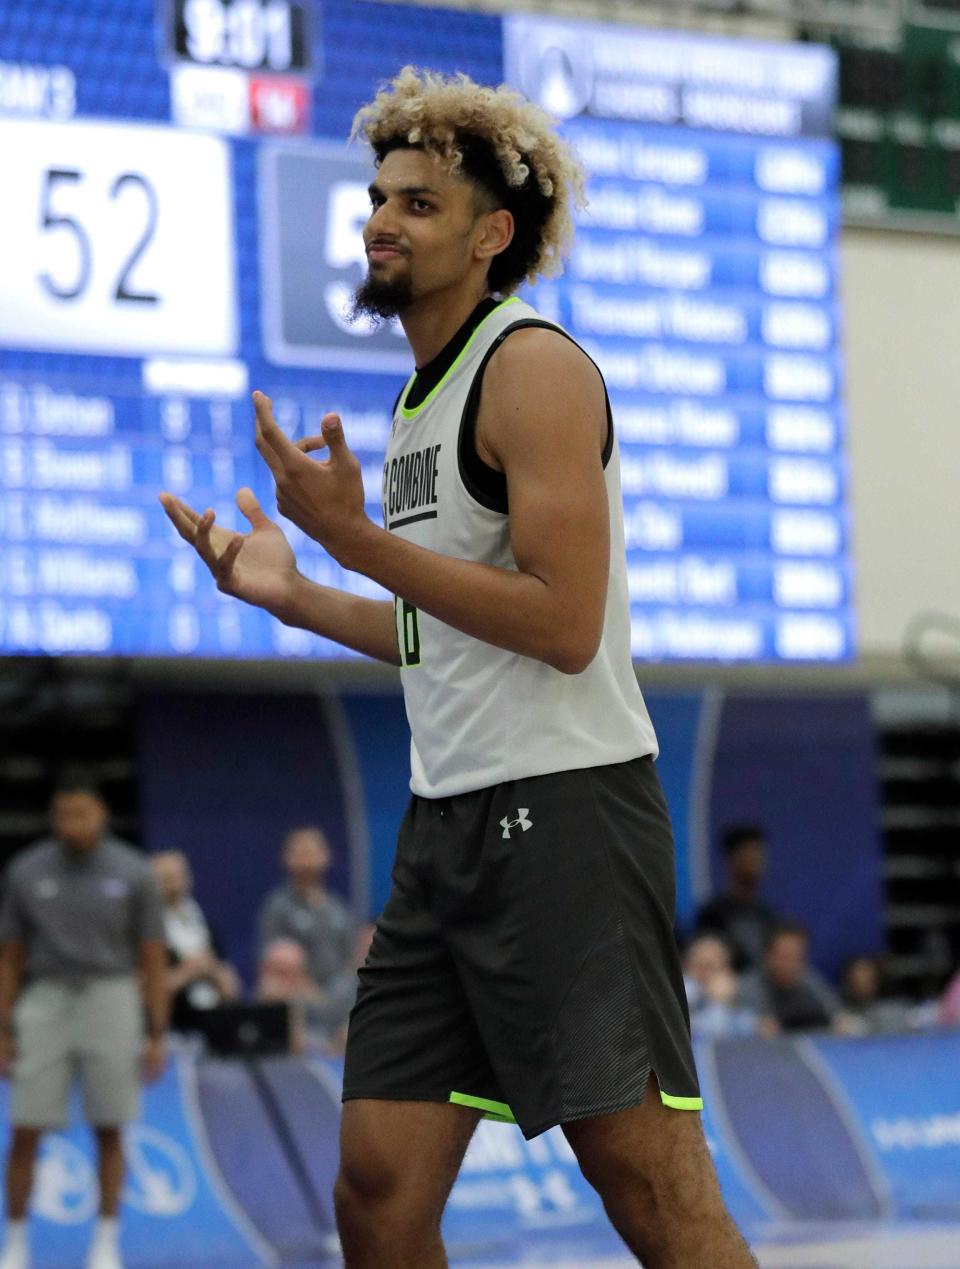 Brian Bowen, of the Sydney Kings in Australia, participates in day one of the NBA draft basketball combine in Chicago, Thursday, May 16, 2019.